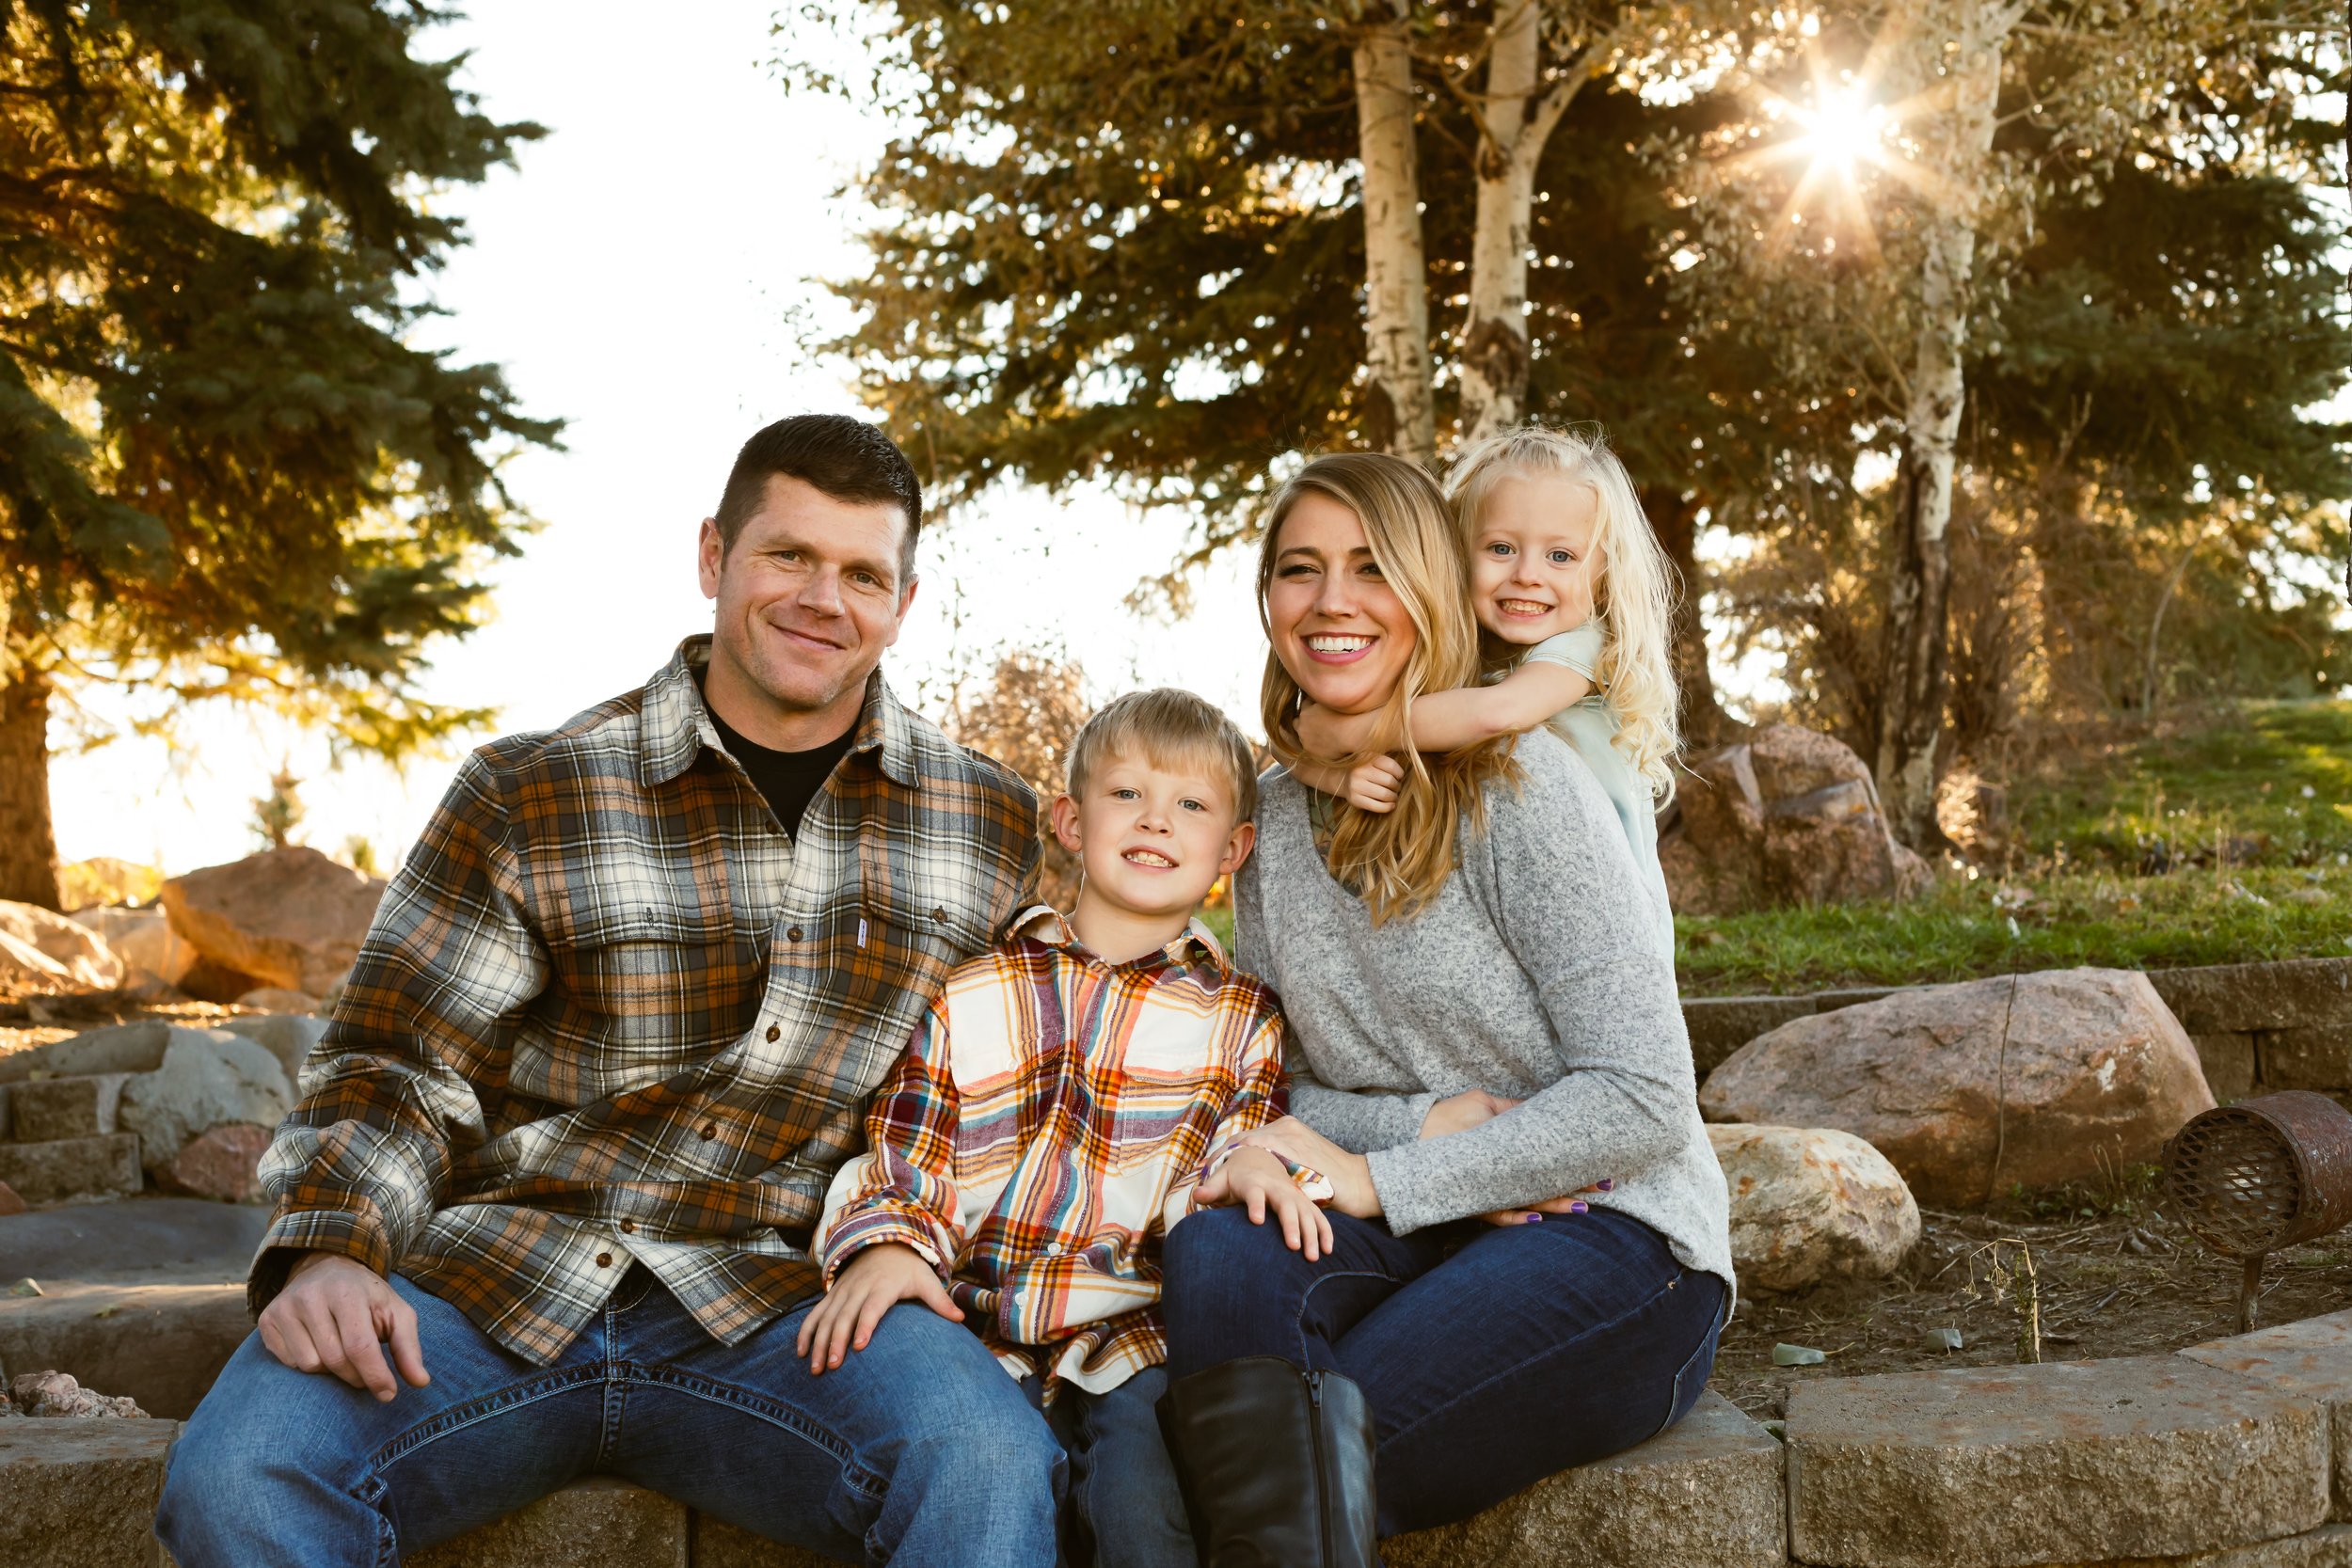 Stebbins-Photography-Wes-Steiger-Alex-Chick-Family-Engagement-Gillette-Wyoming5.jpg